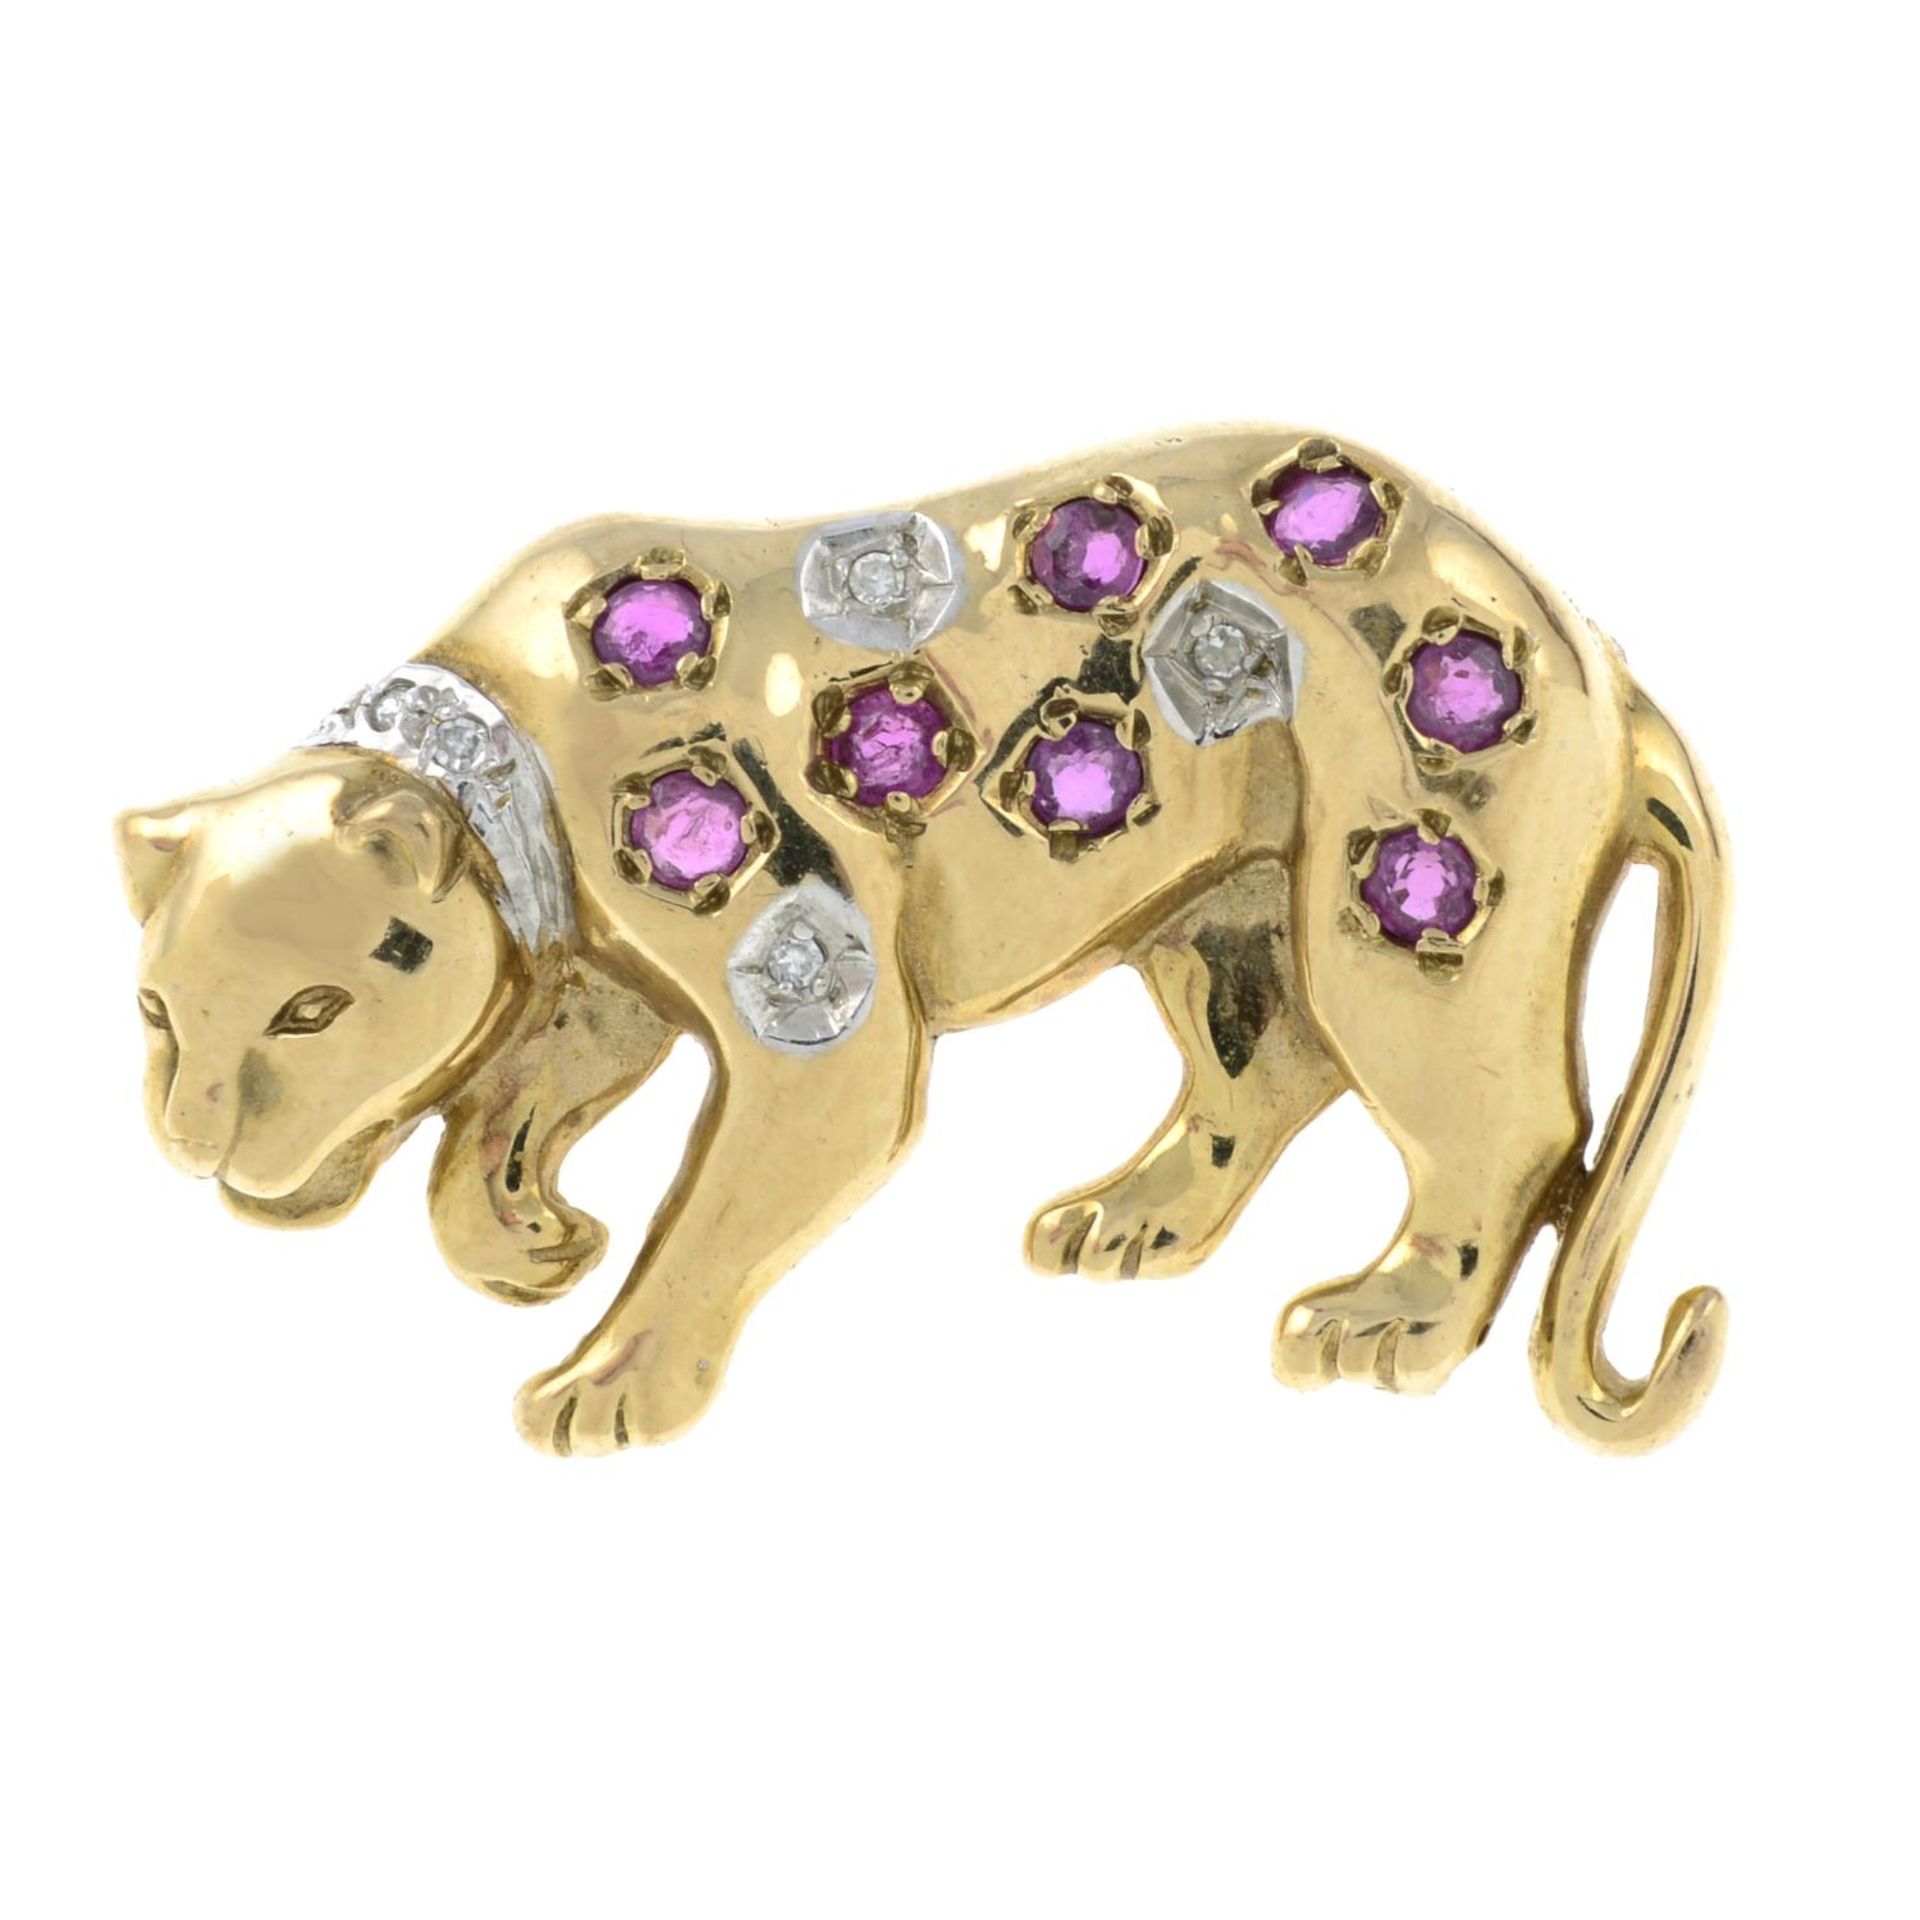 A 9ct gold ruby and diamond leopard brooch.Hallmarks for 9ct gold.